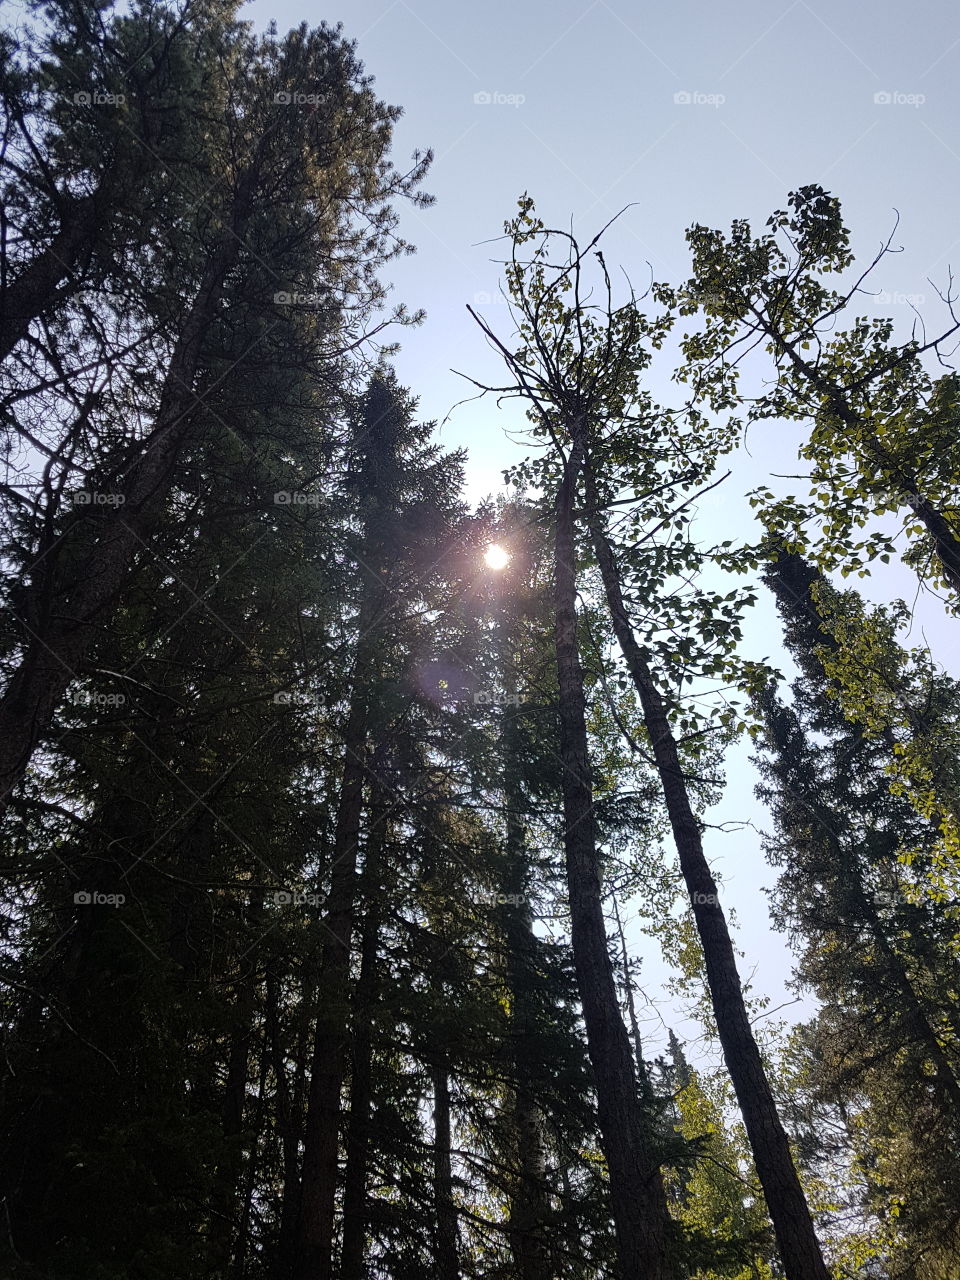 The sun peaking amongst the trees